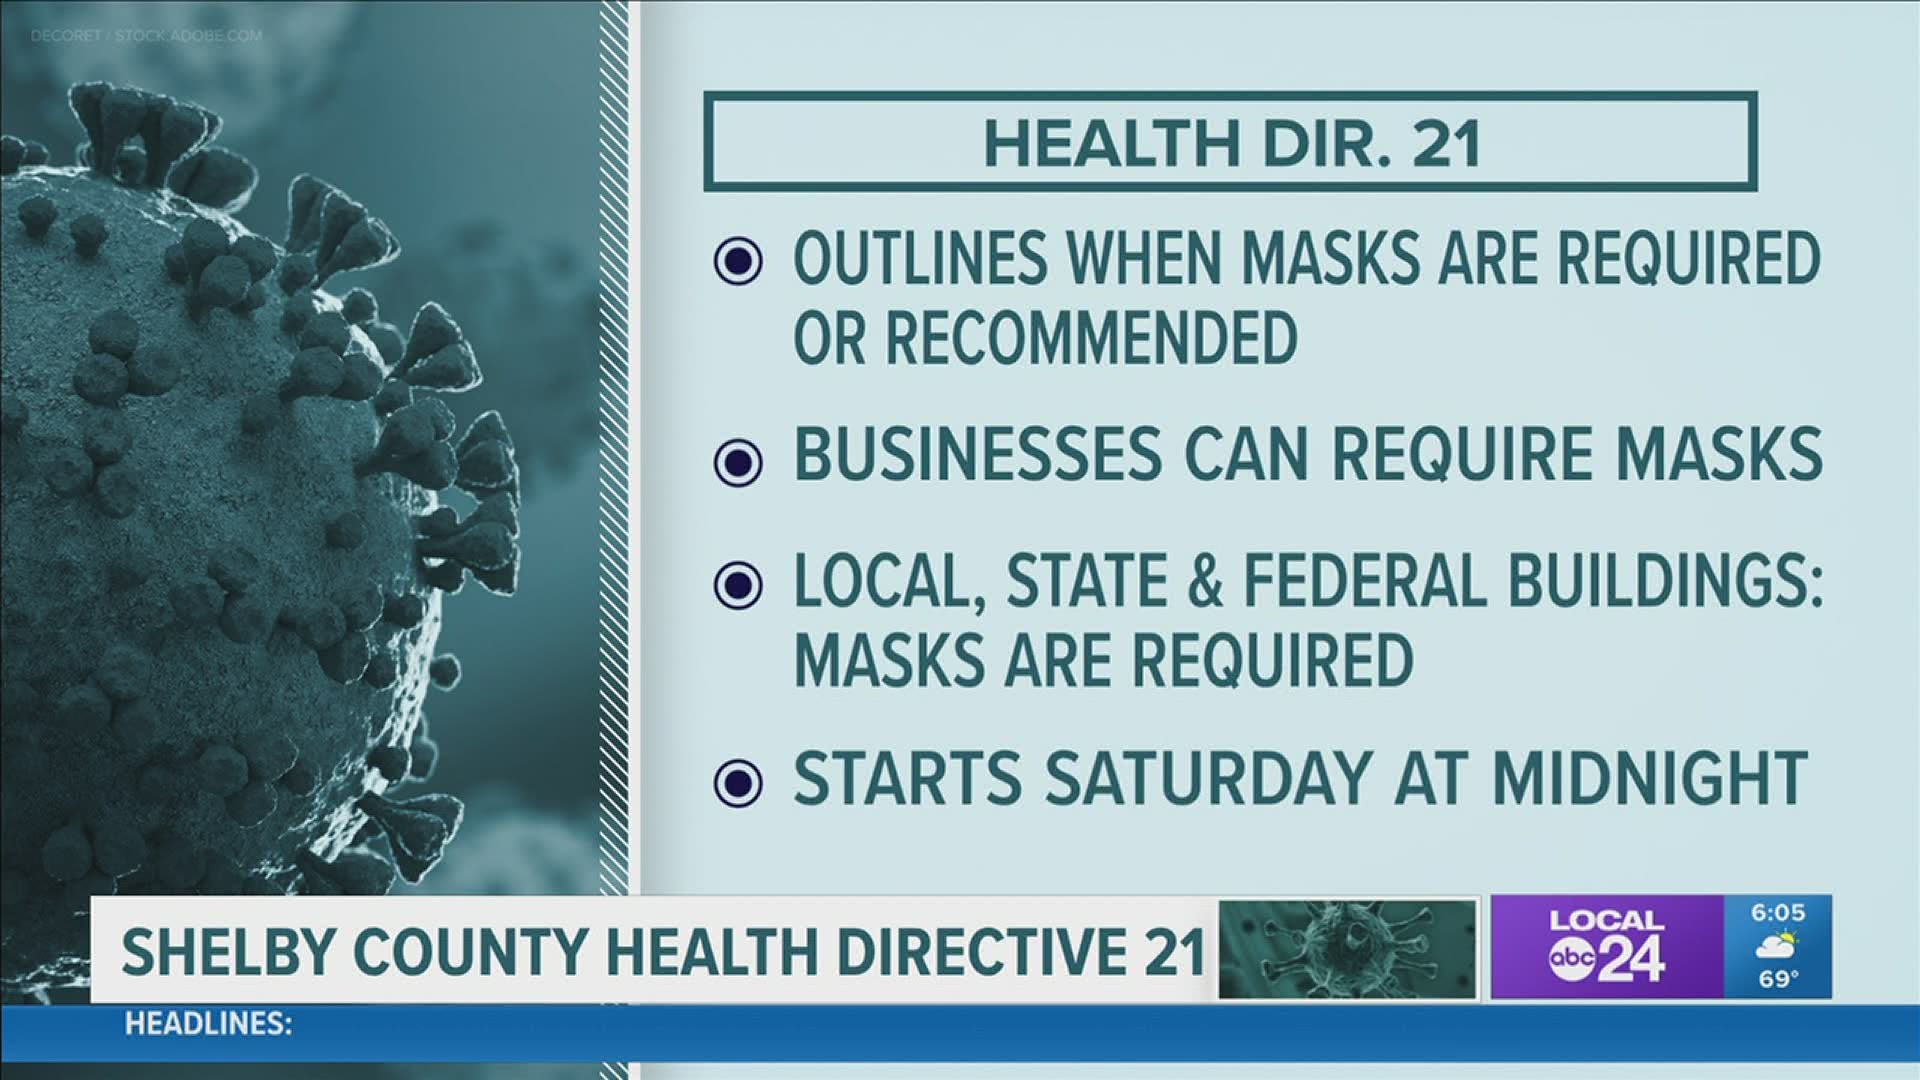 Find the latest information from the Shelby County Health Department below.